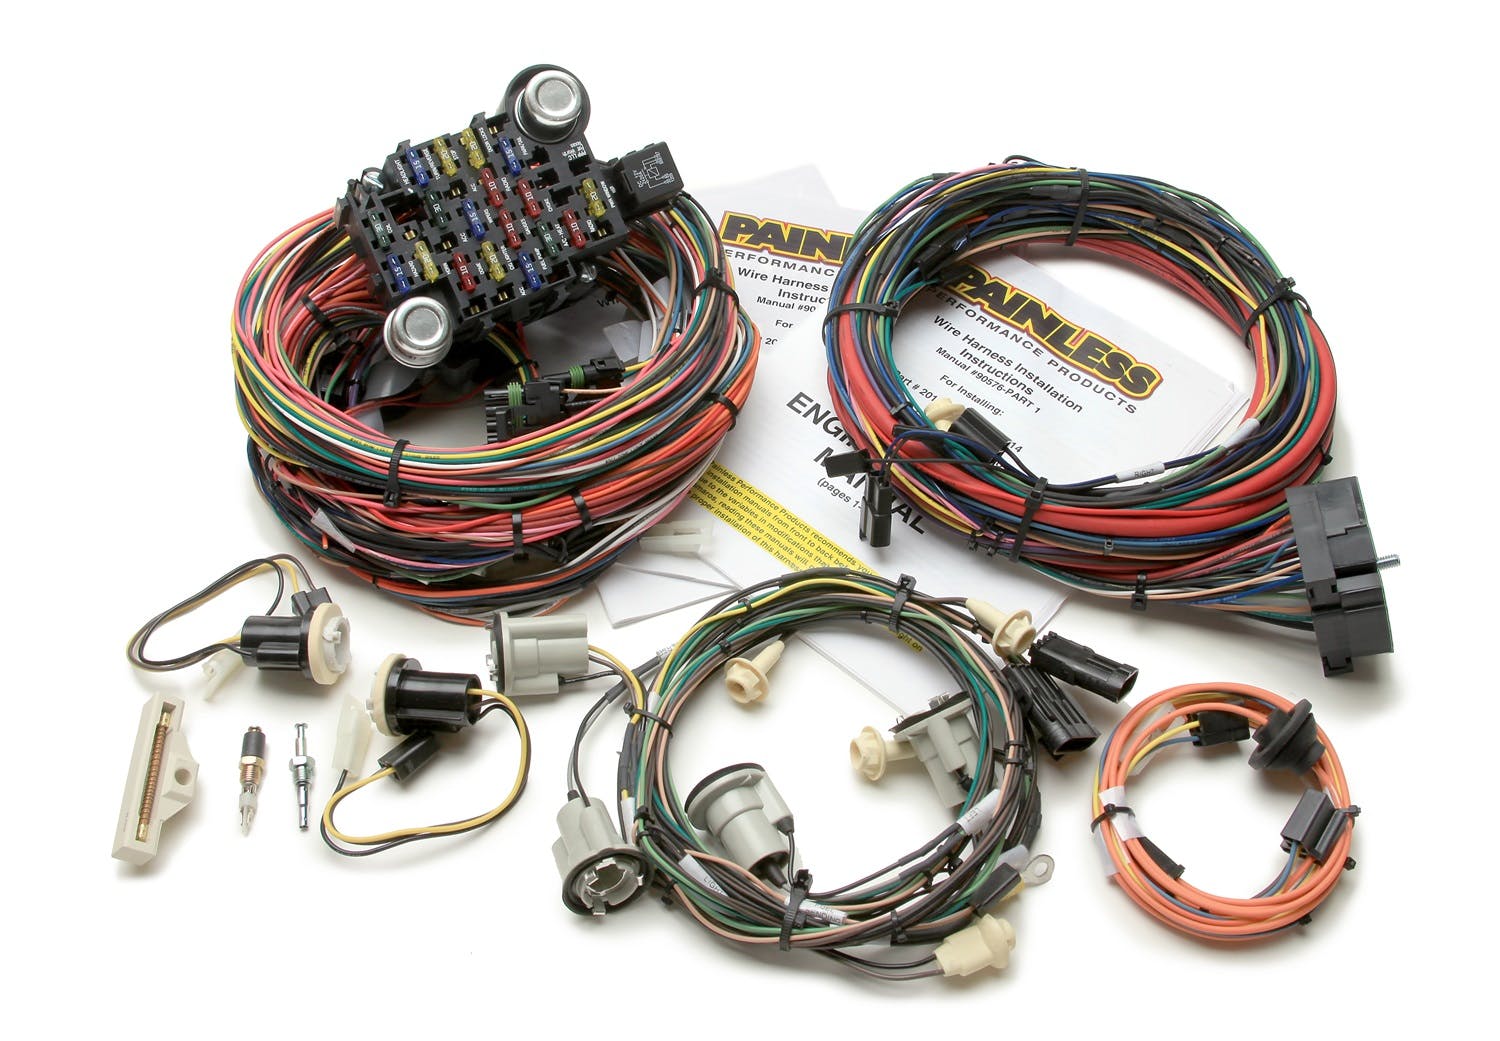 Painless 20113 Chassis Wiring Harness